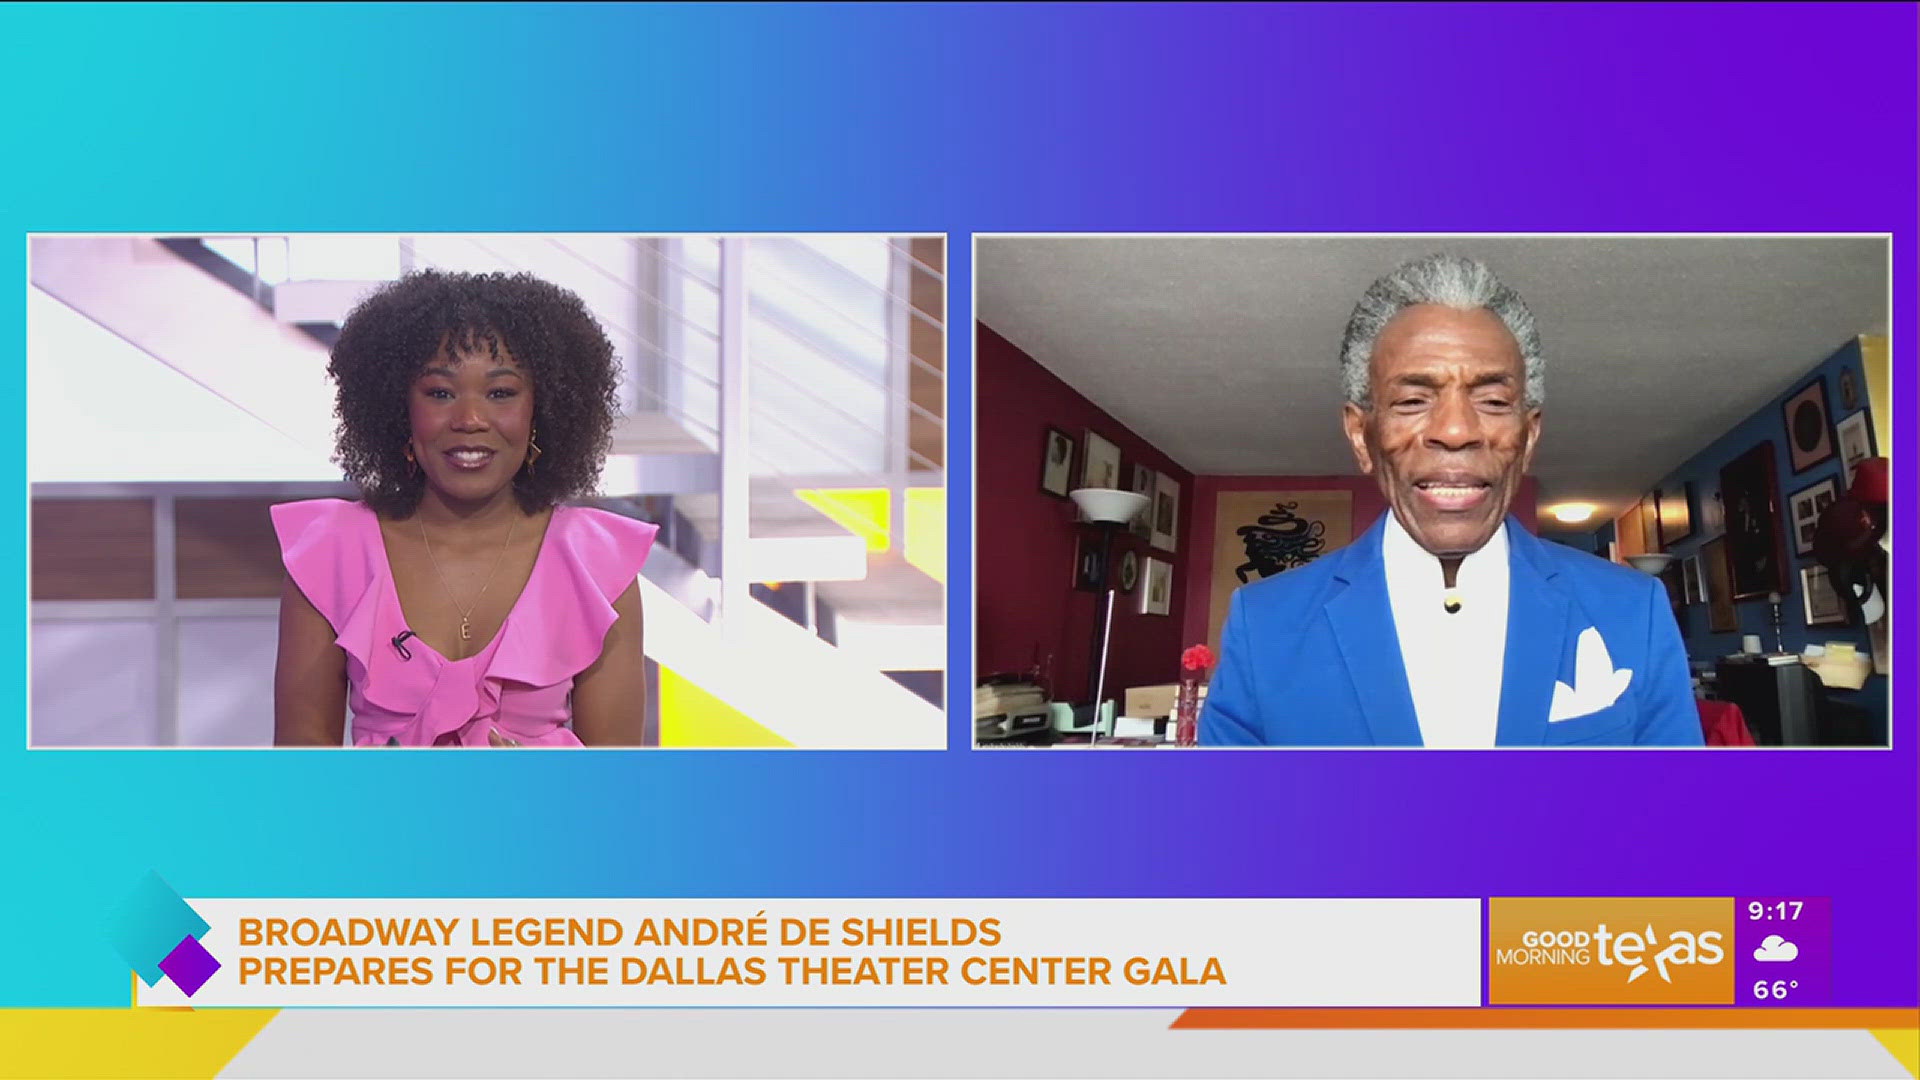 André De Shields shares more about his life and plans when he takes the Dallas Theater Center gala stage. Go to dtccenterstage.com for more information.